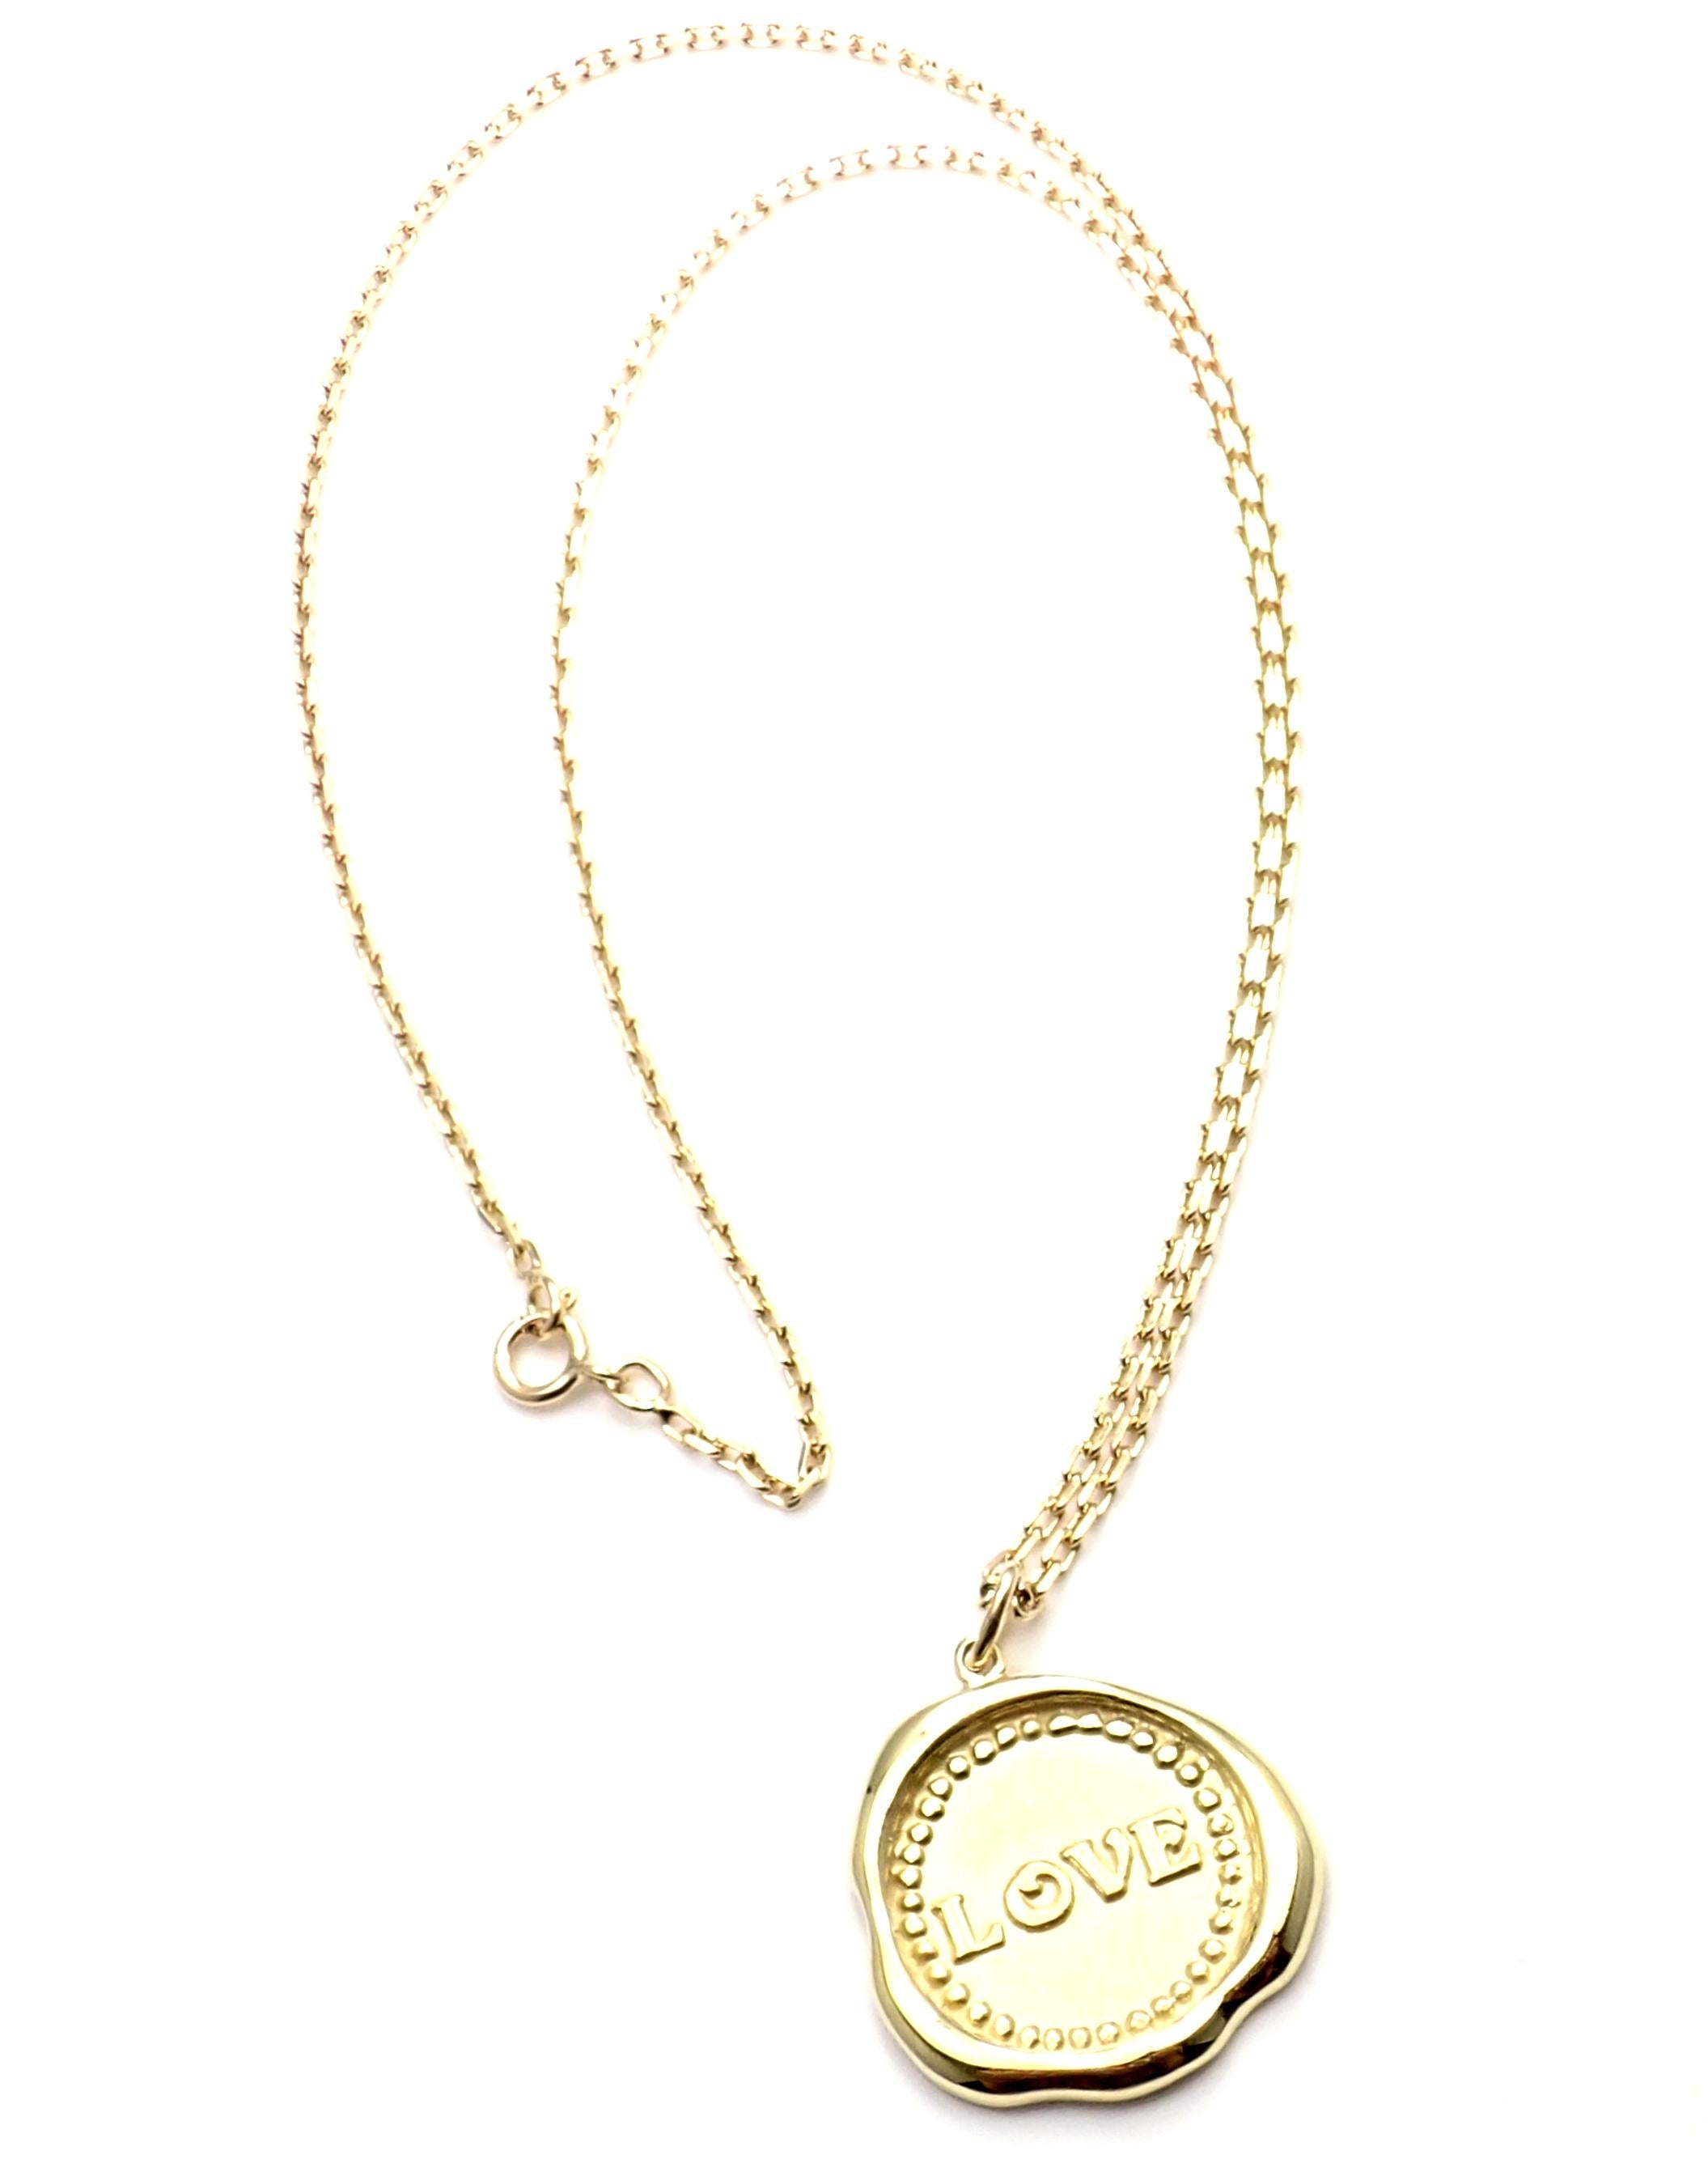 18k Yellow Gold Vintage Love Pendant Necklace by Van Cleef & Arpels. 
This necklace comes with Van Cleef & Arpels service paper.
Details: 
Length: 20